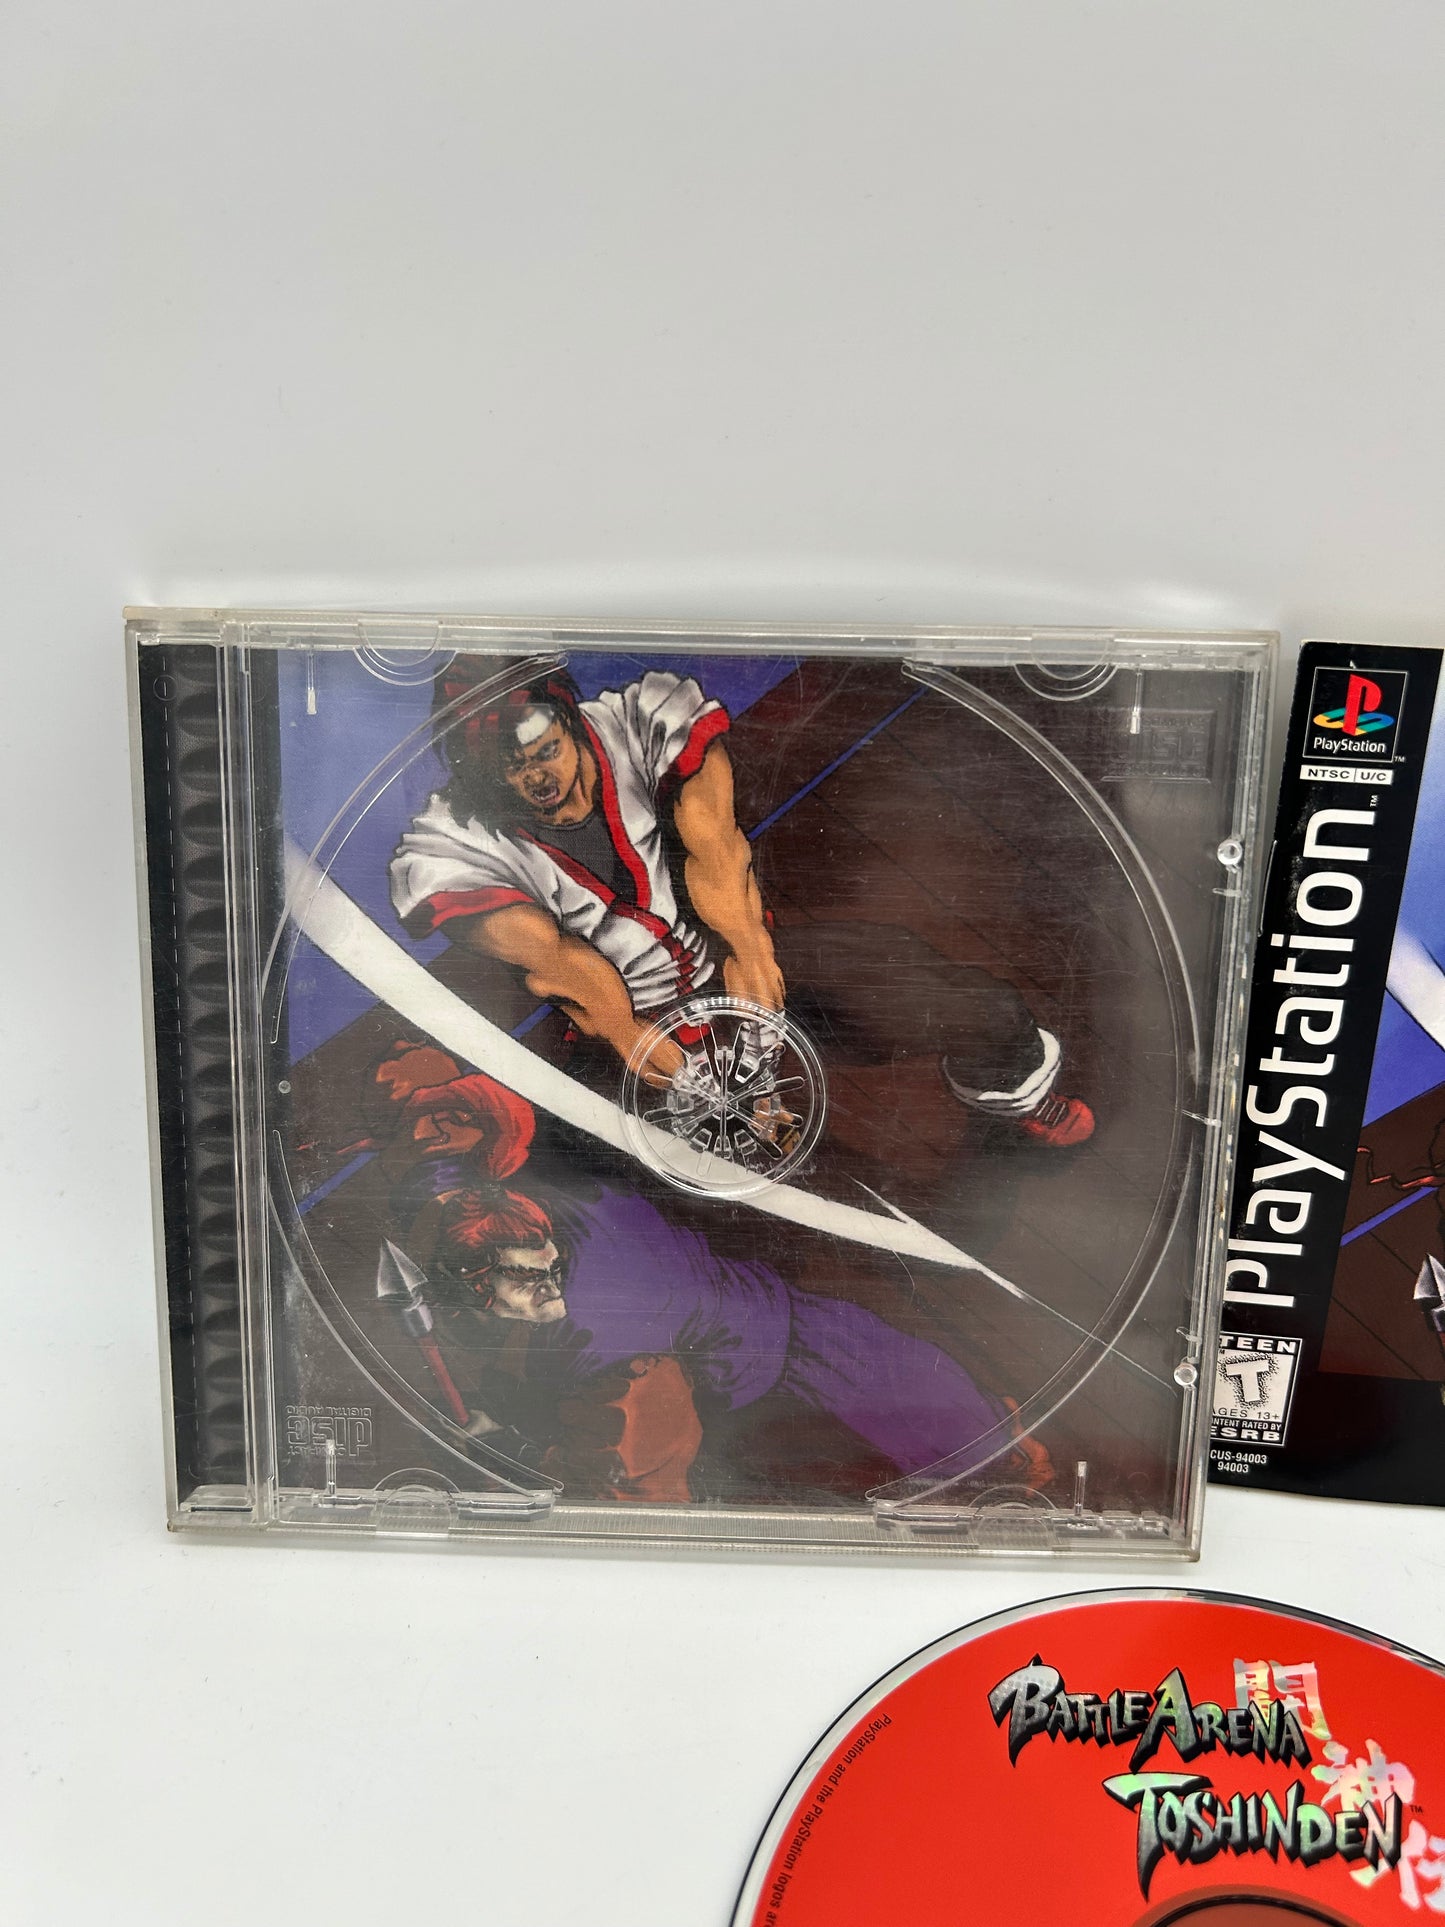 SONY PLAYSTATiON [PS1] | BATTLE ARENA TOSHiNDEN | NOT FOR RESALE